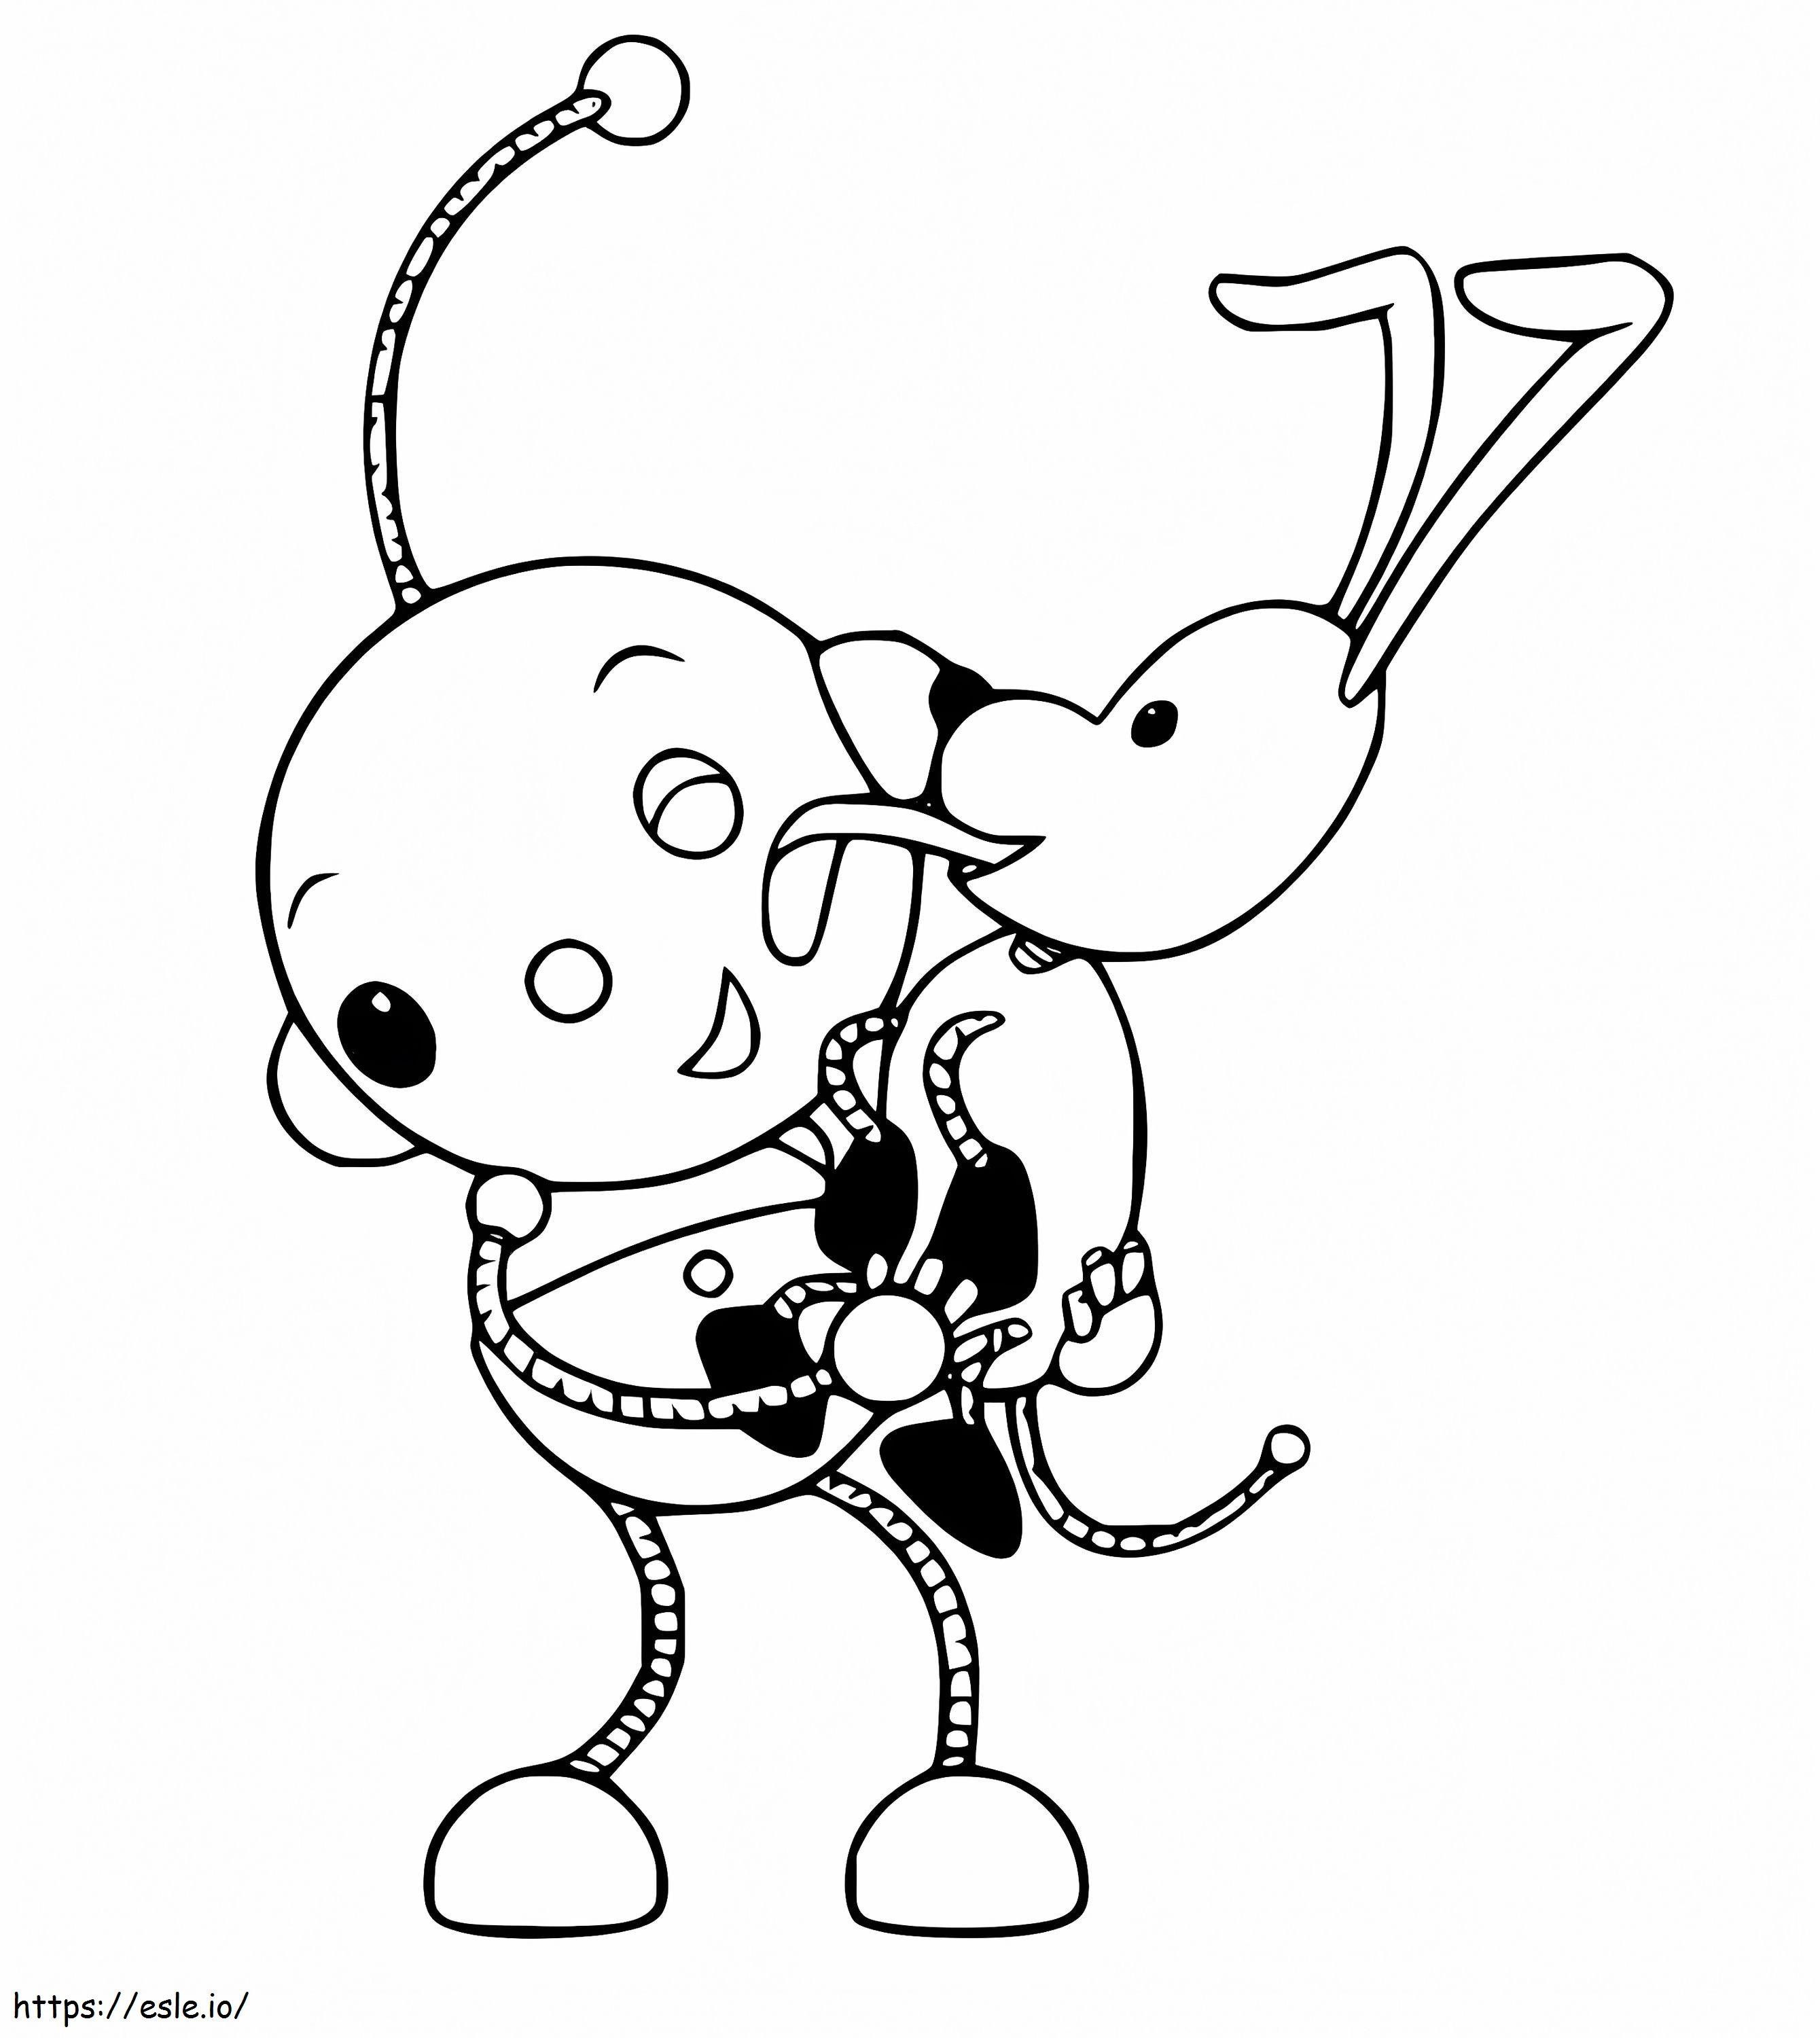 Oil Polie With Spot coloring page